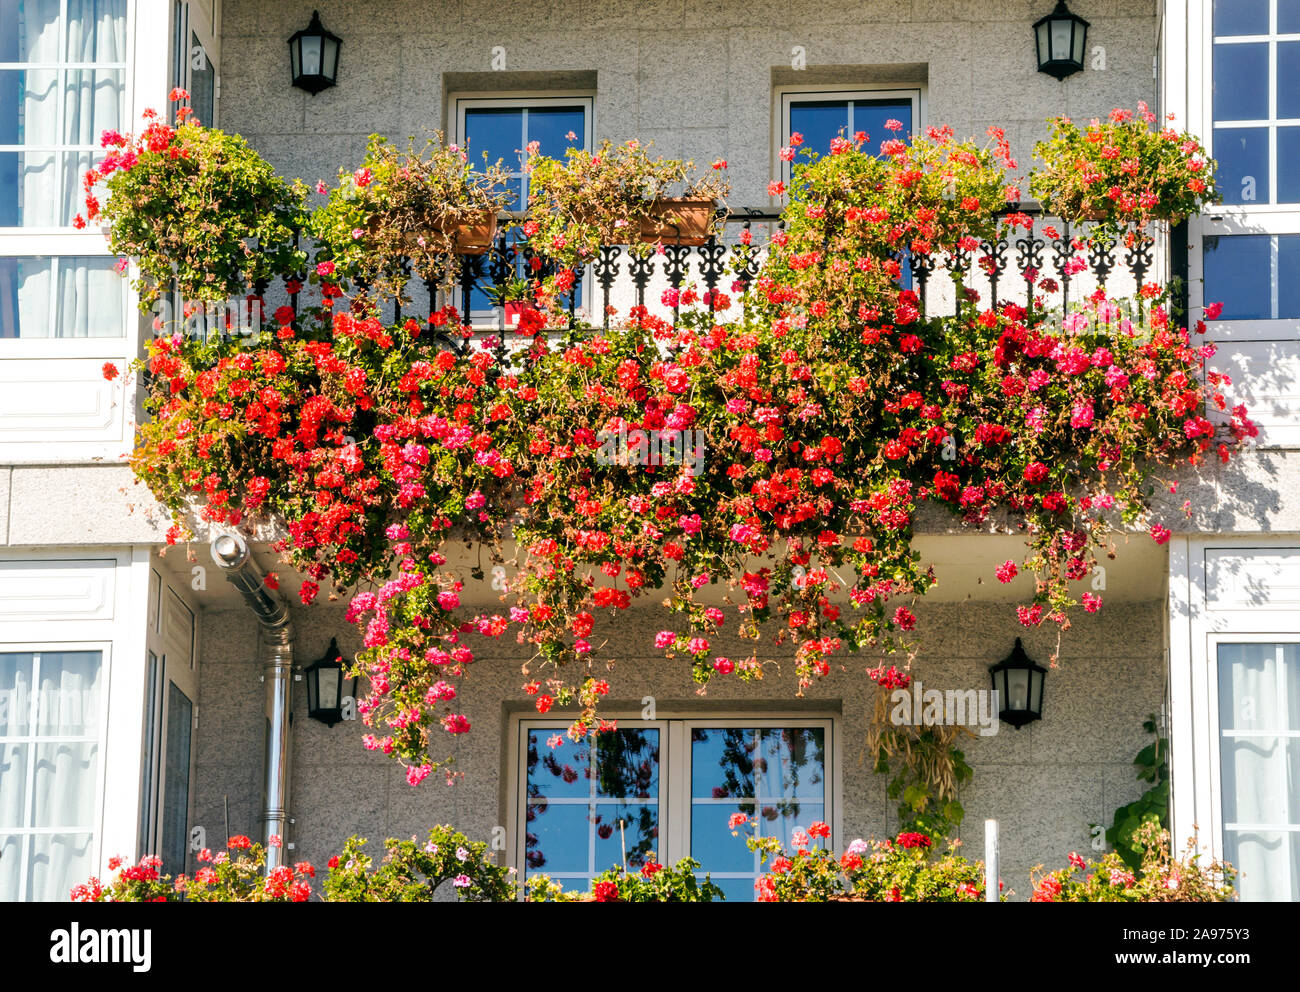 Windows with flowers in the balcony in a wall Stock Photo